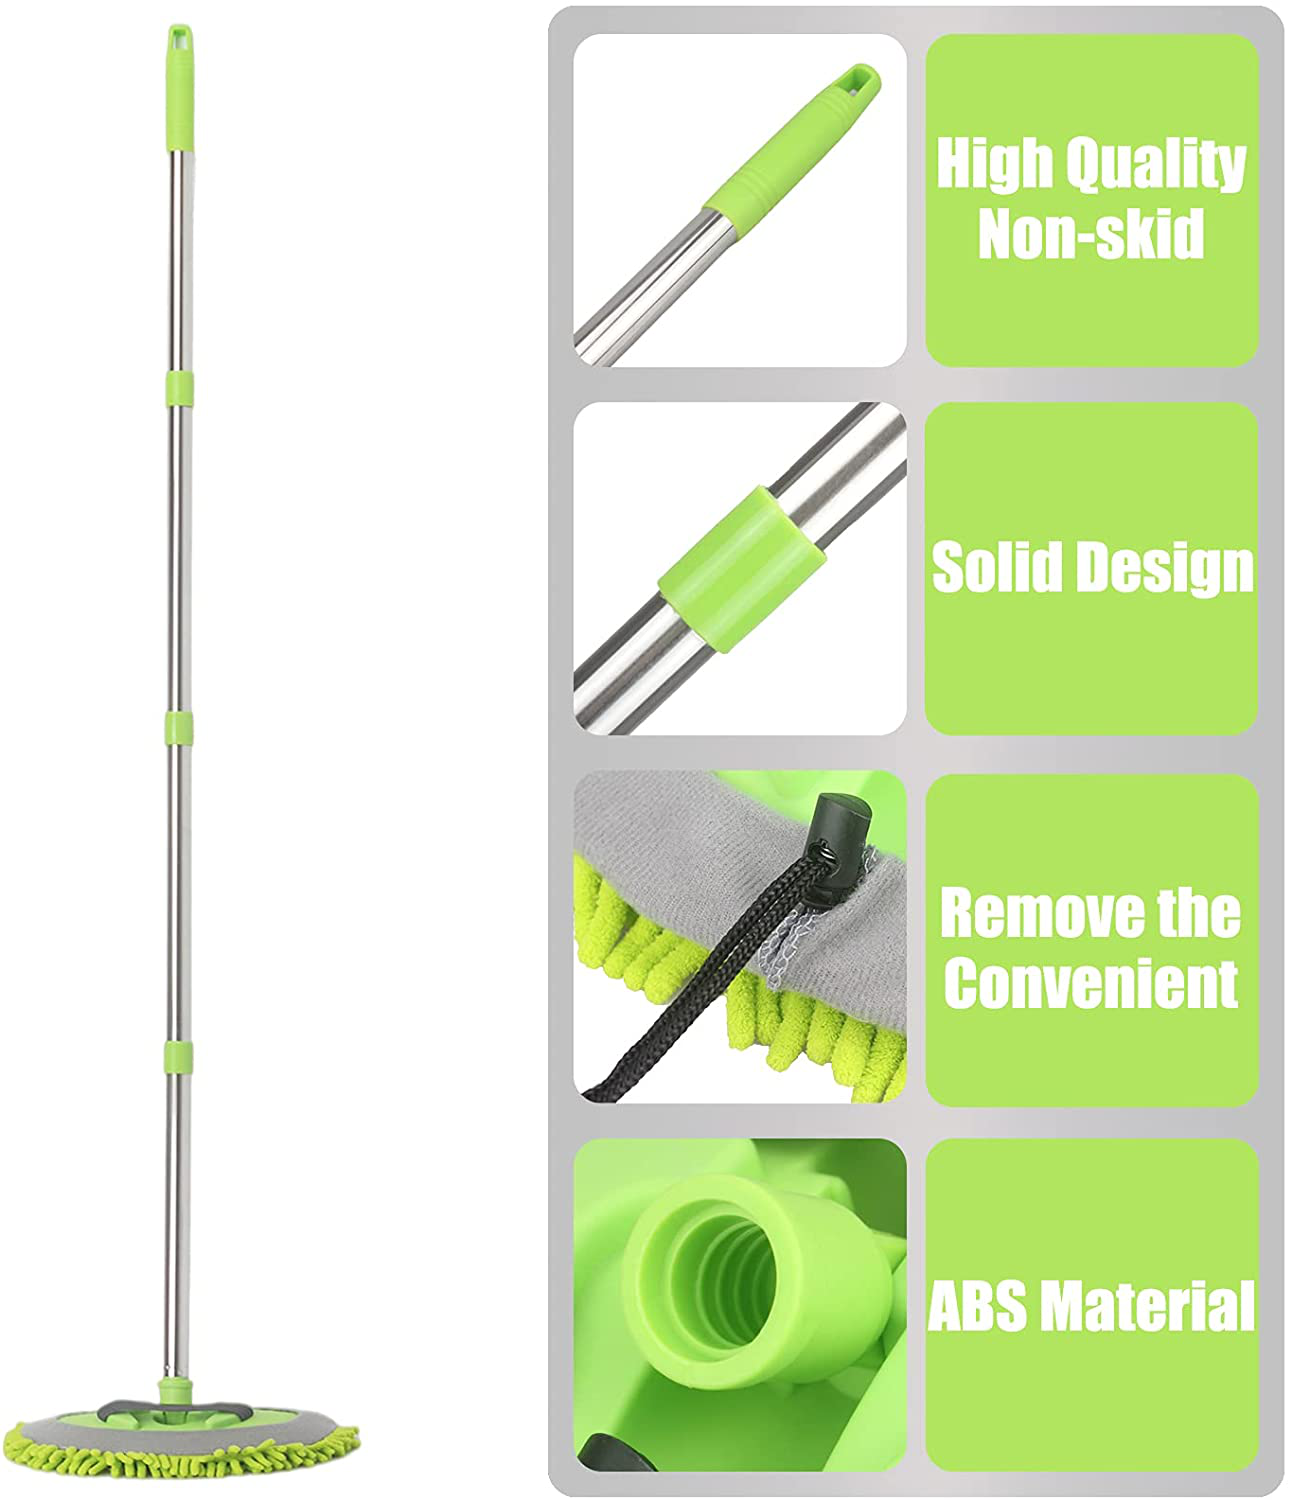 62" Car Wash Mop Kit, Car Wash Brush with Long Handle Stainless Steel Pole, Car Wash Kit Car Detailing Kit Car Wash Mop Mitt Car Cleaning Supplies Kit for RV Cars SUV Trucks and Bus (Green)